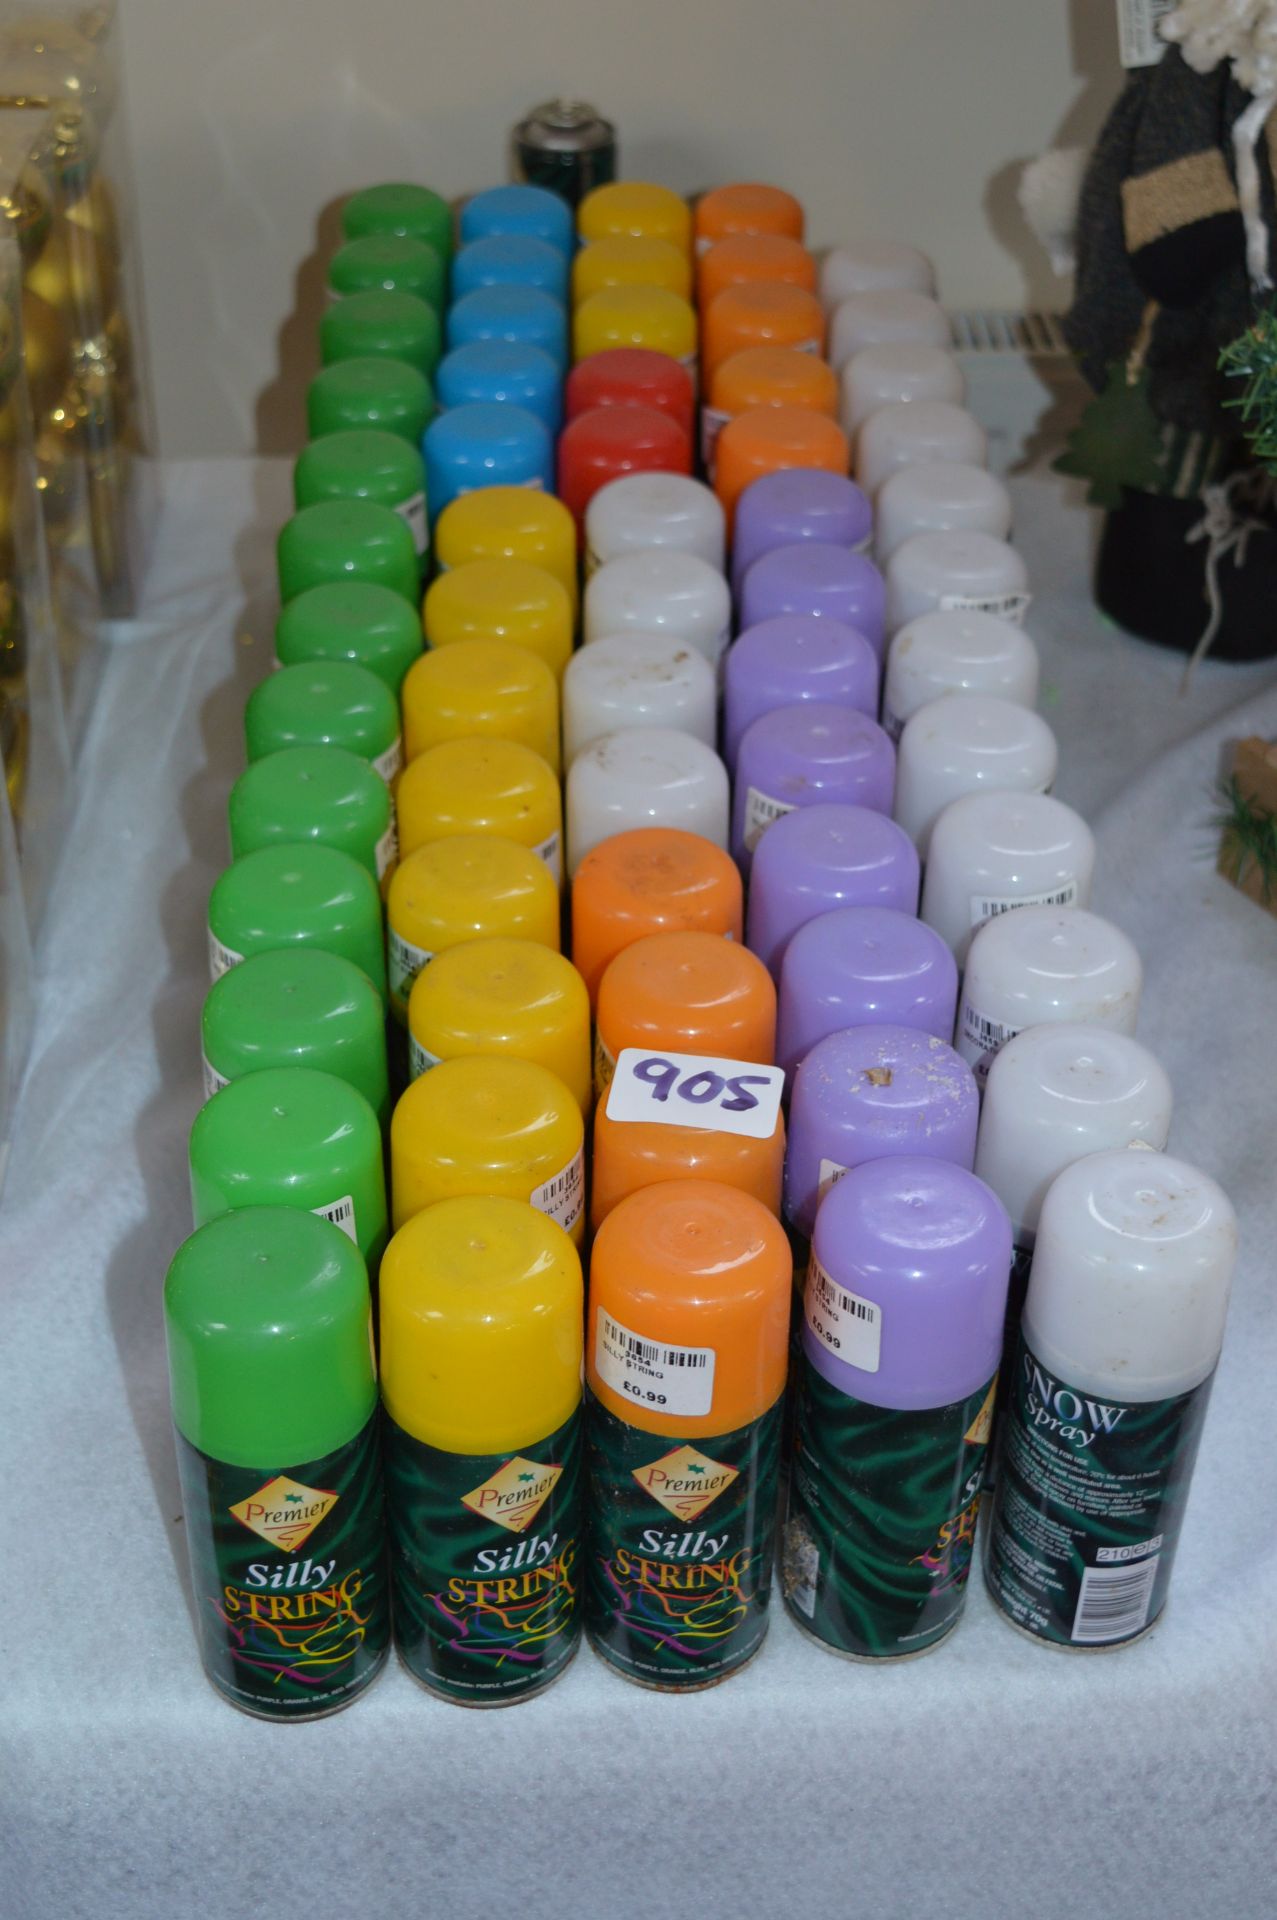 *Large Quantity of Assorted Premier Silky String Spray Cans and Premier Snow Spray